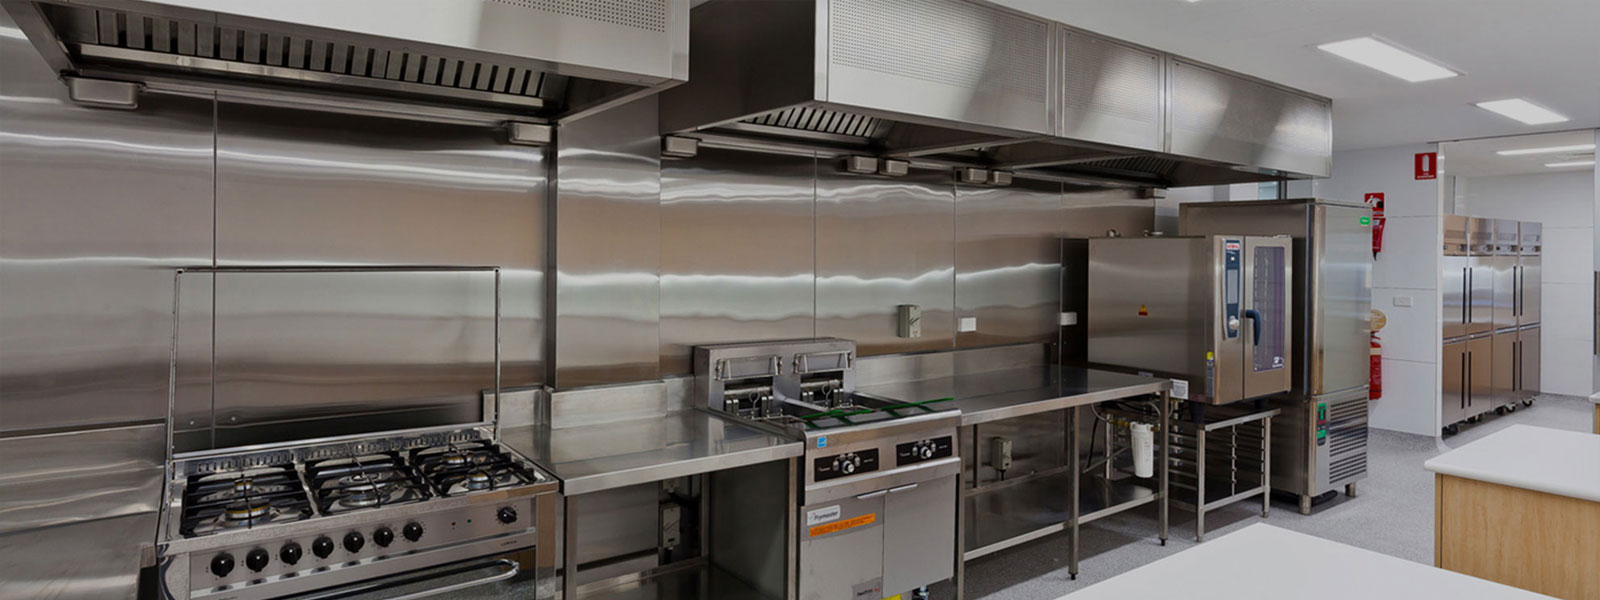 Hotel Kitchen Equipments Manufacturers in Bangalore